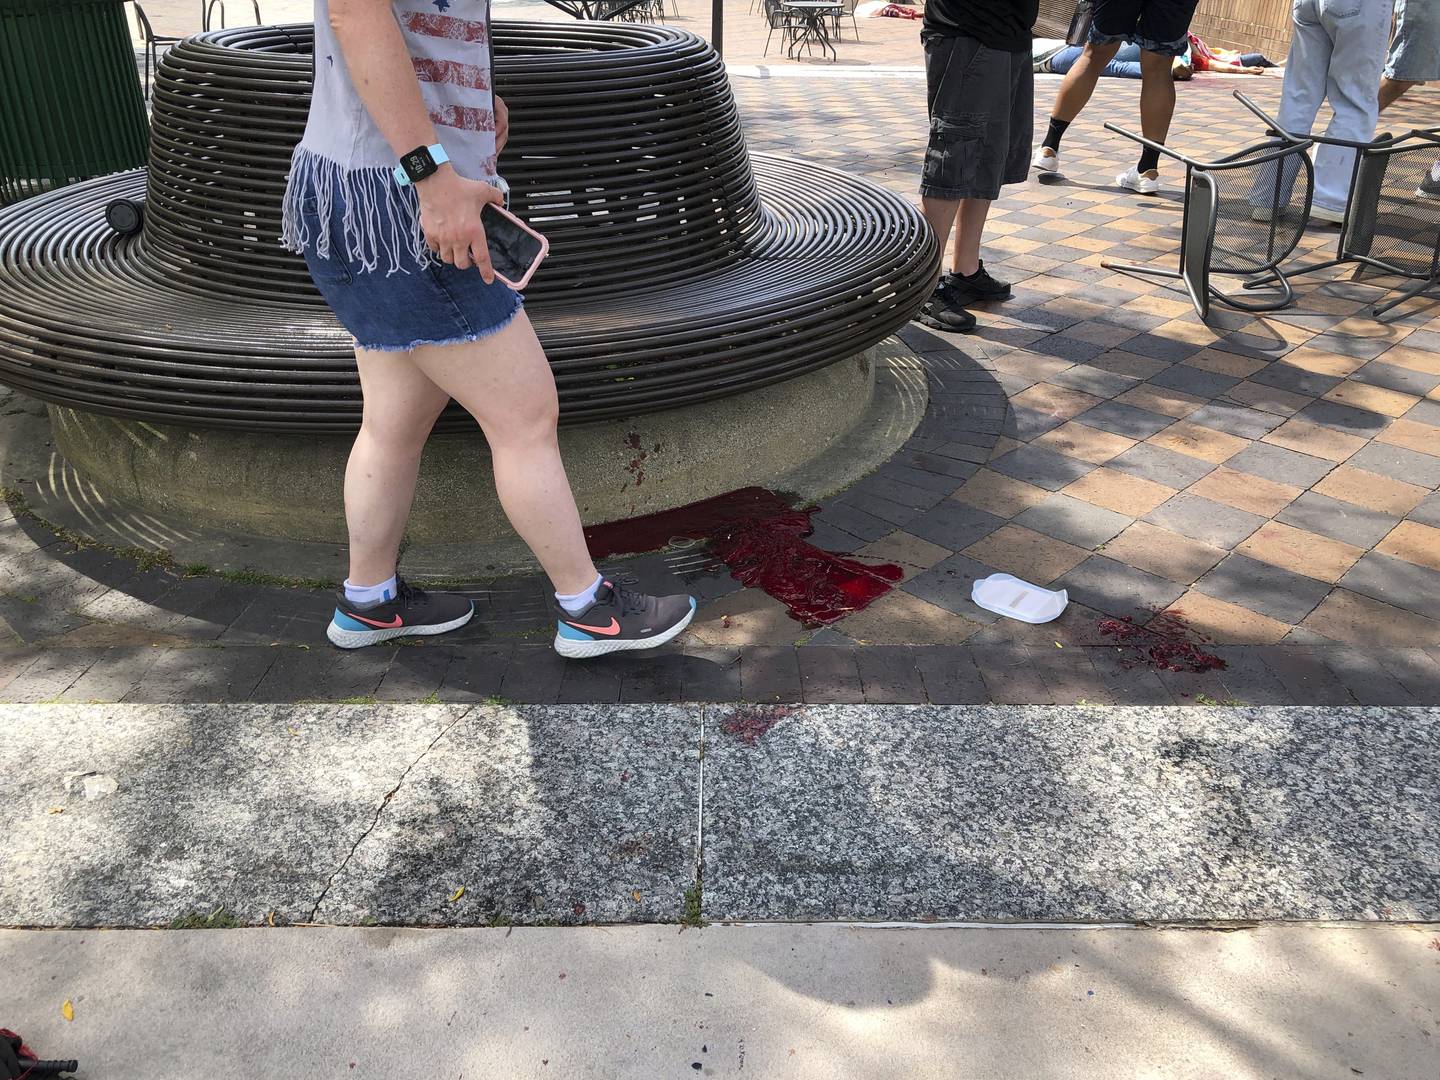 Blood pooled at Port Clinton Square in Highland Park, after a shooting at a July Fourth parade, in a Chicago suburb, Monday, July 4, 2022. (Lynn Sweet/Chicago Sun-Times via AP)